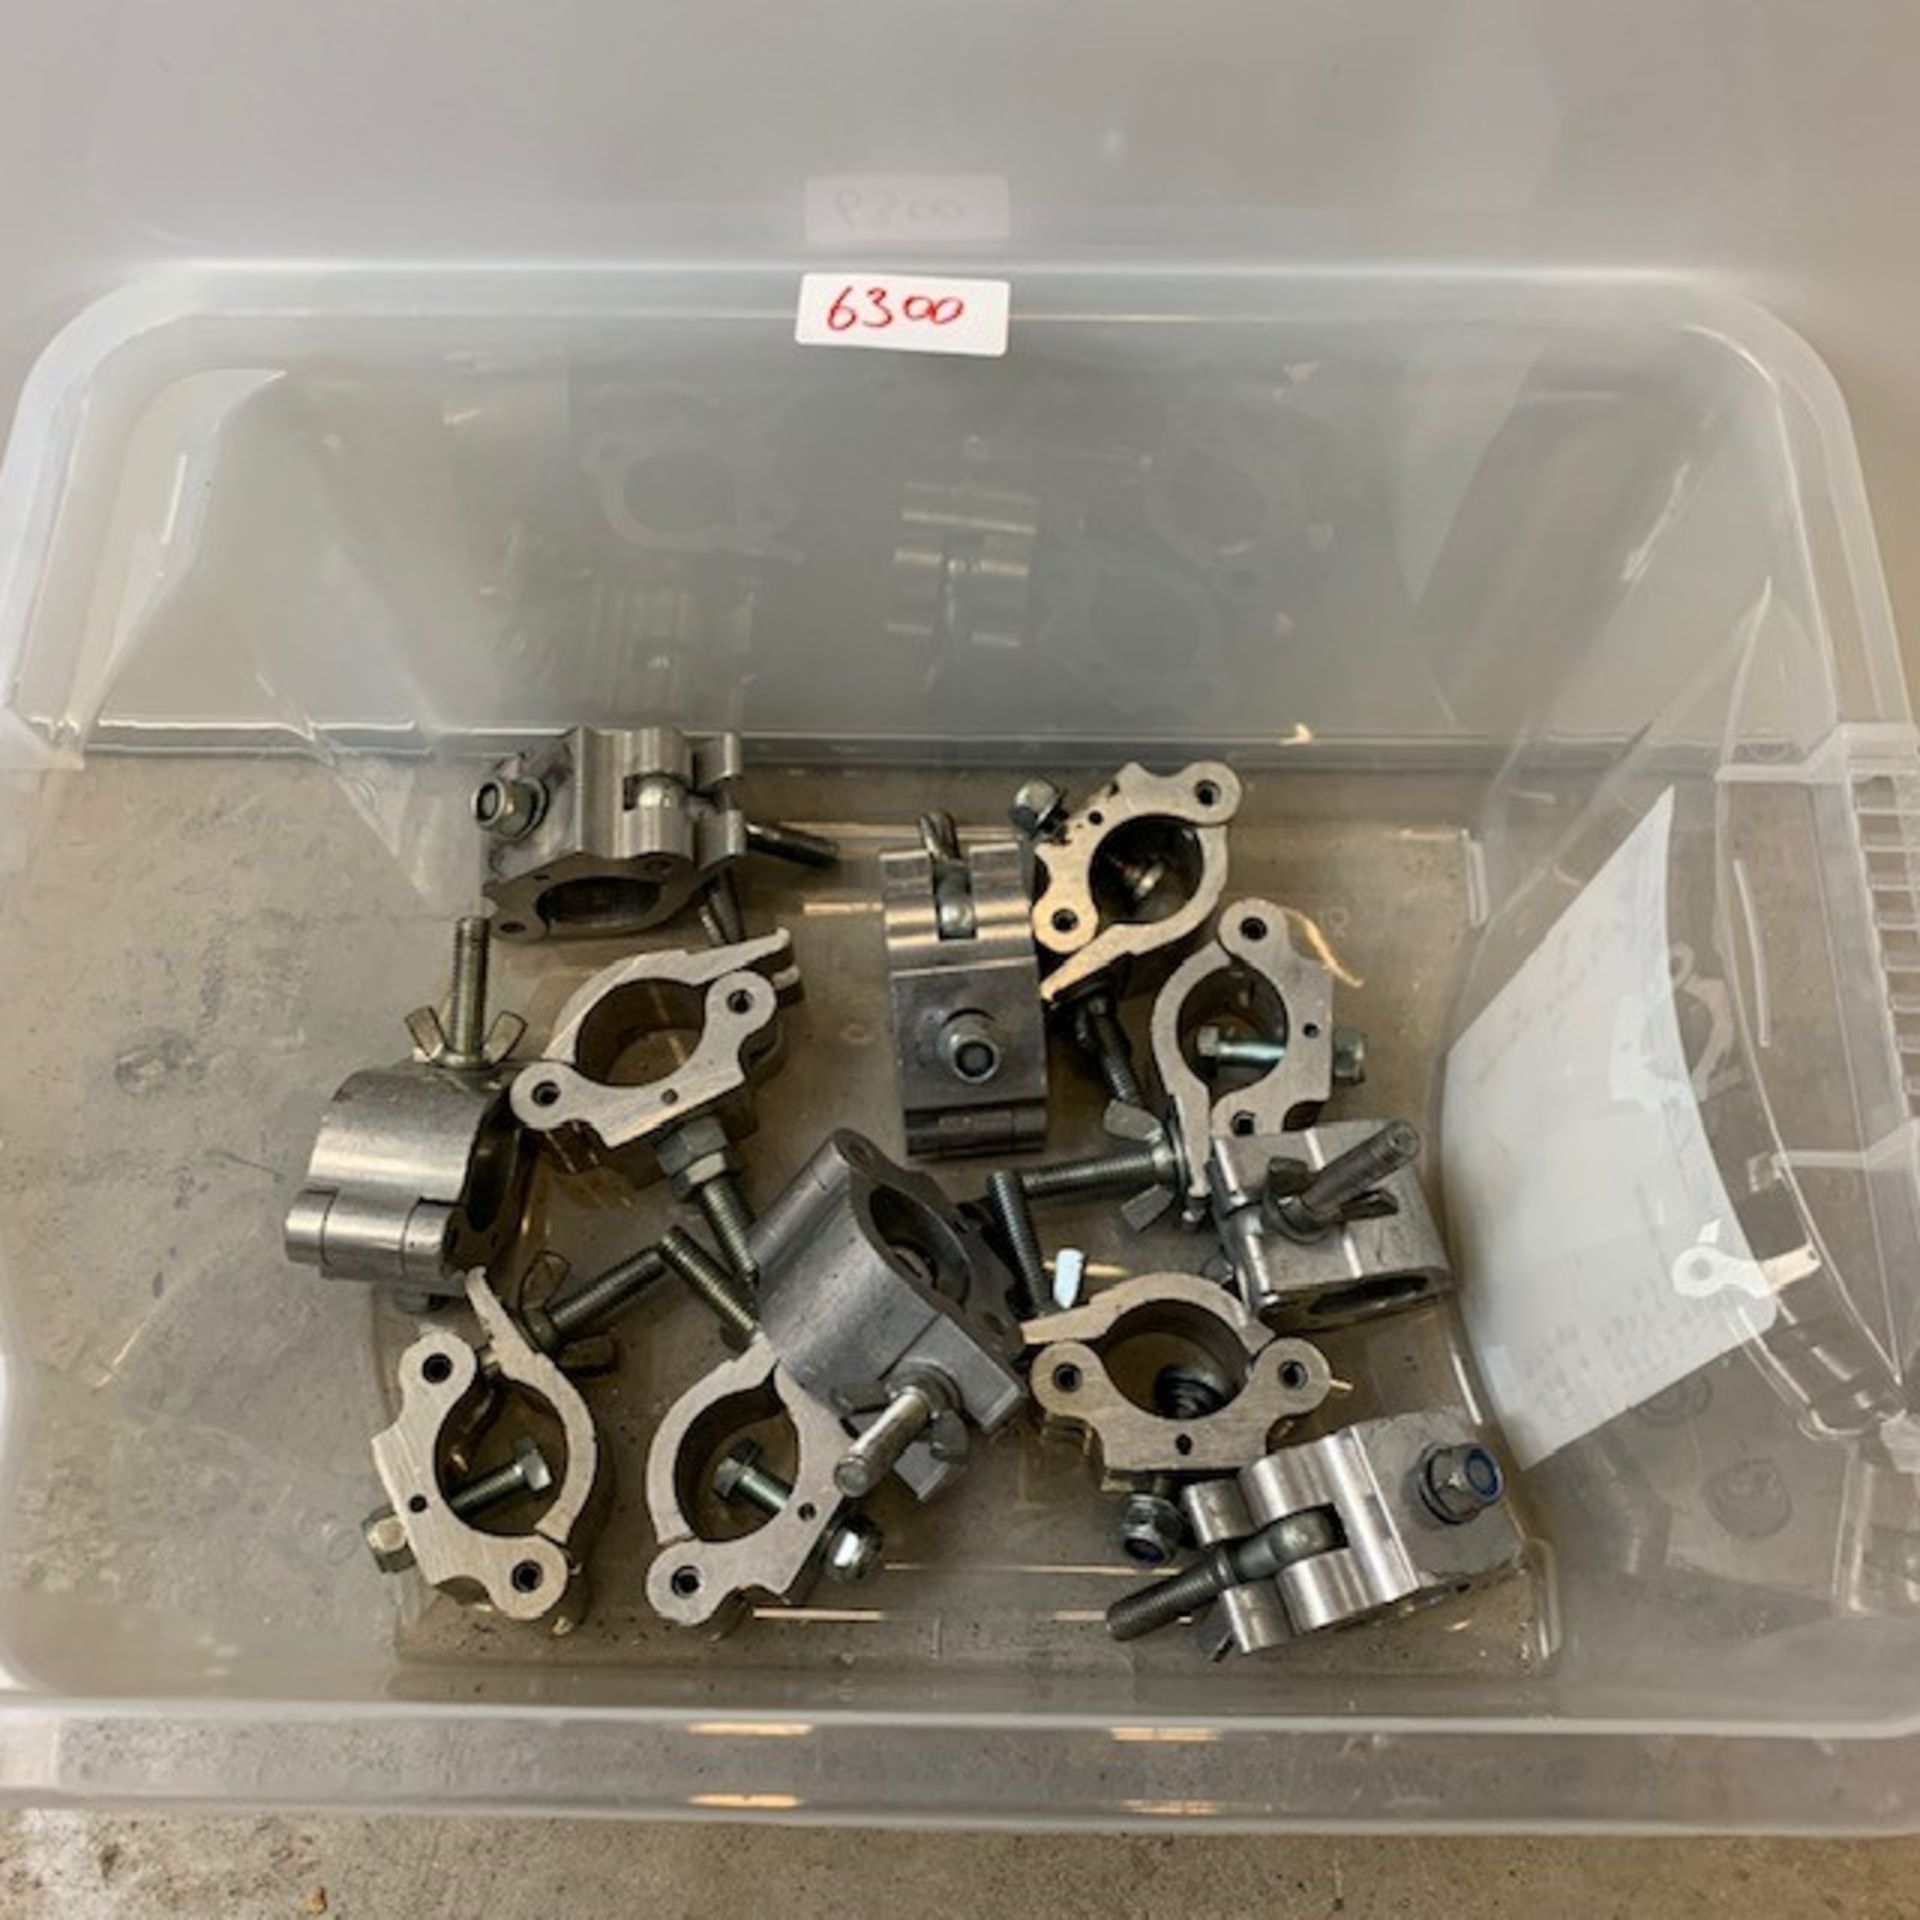 10 x Doughty Half Coupler Clamps 500kg - Ref: 6300 - CL581 - Location: Altrincham WA14Items will